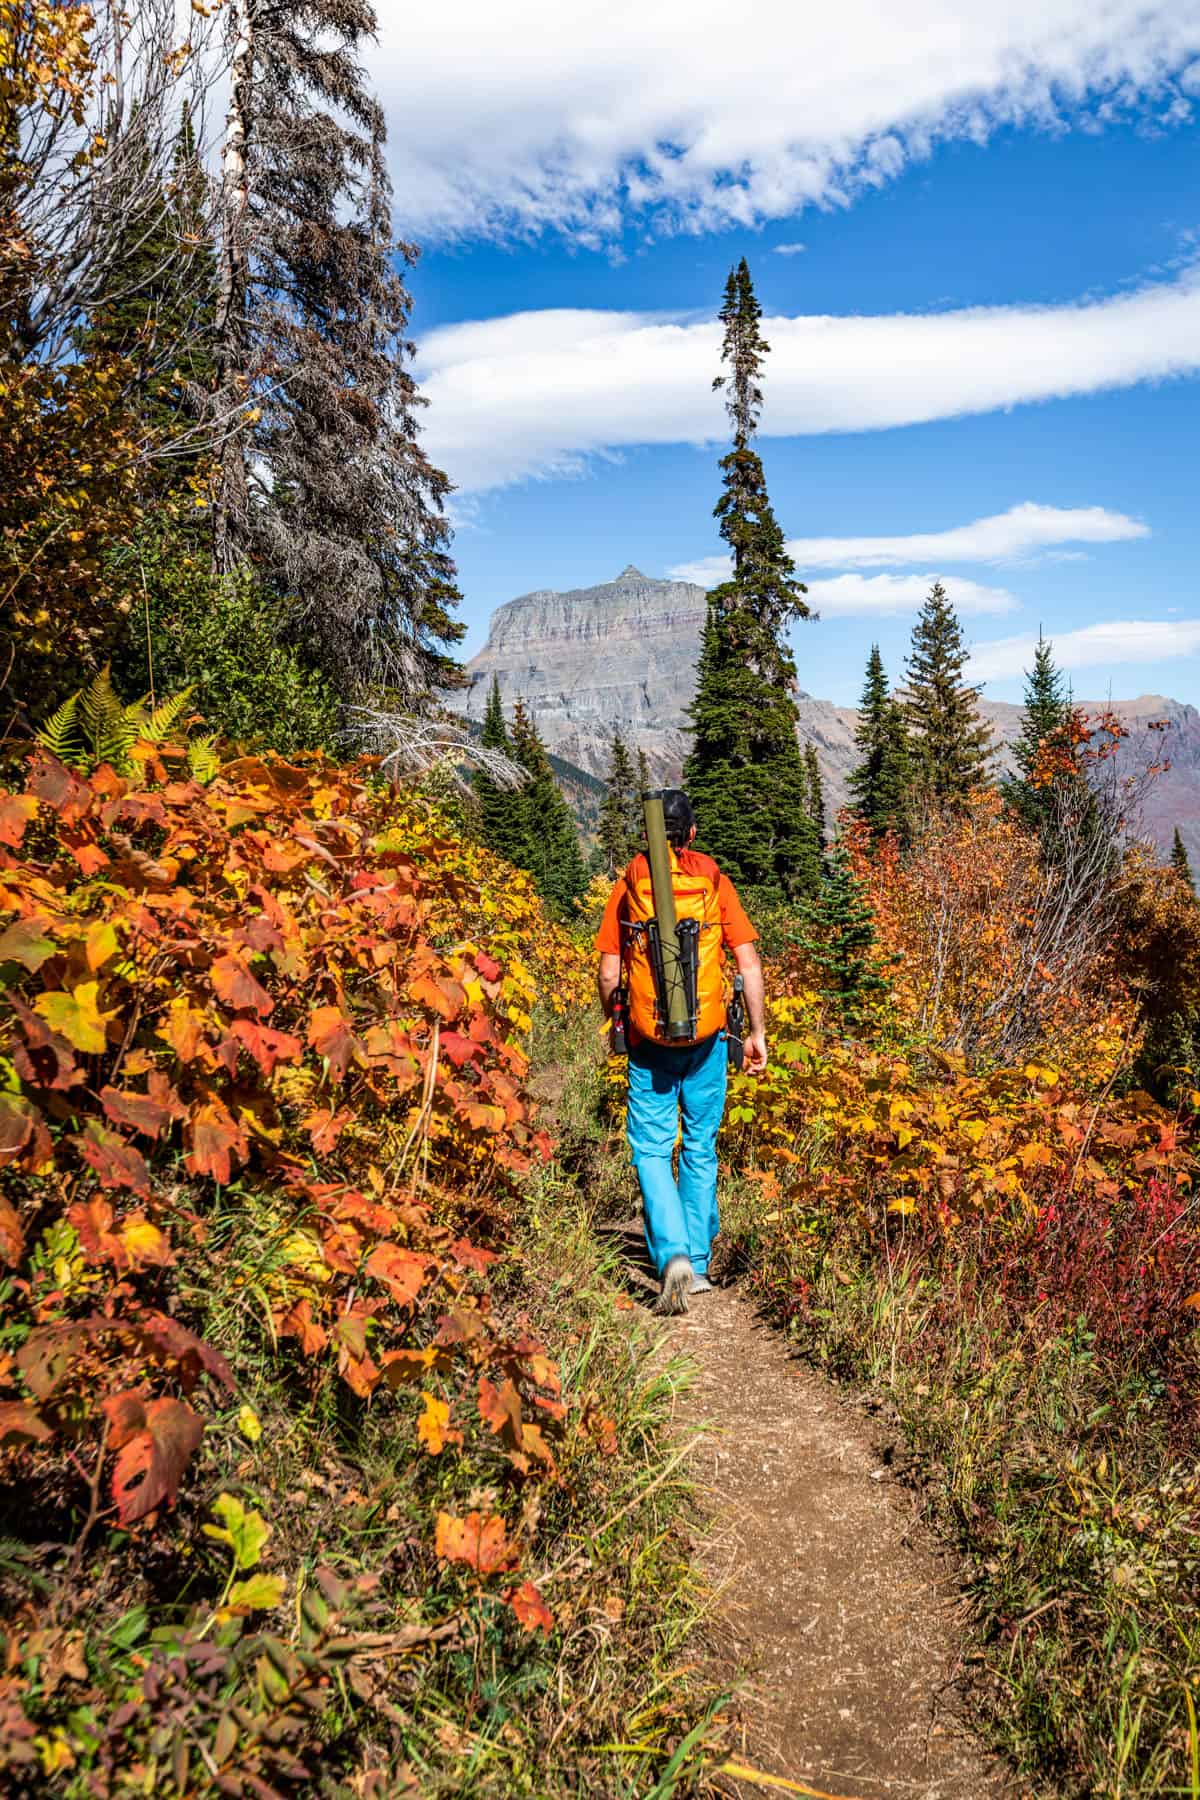 A man with an orange backpack hiking down a trail with orange and red fall foliage on either side and a mountain in the background.